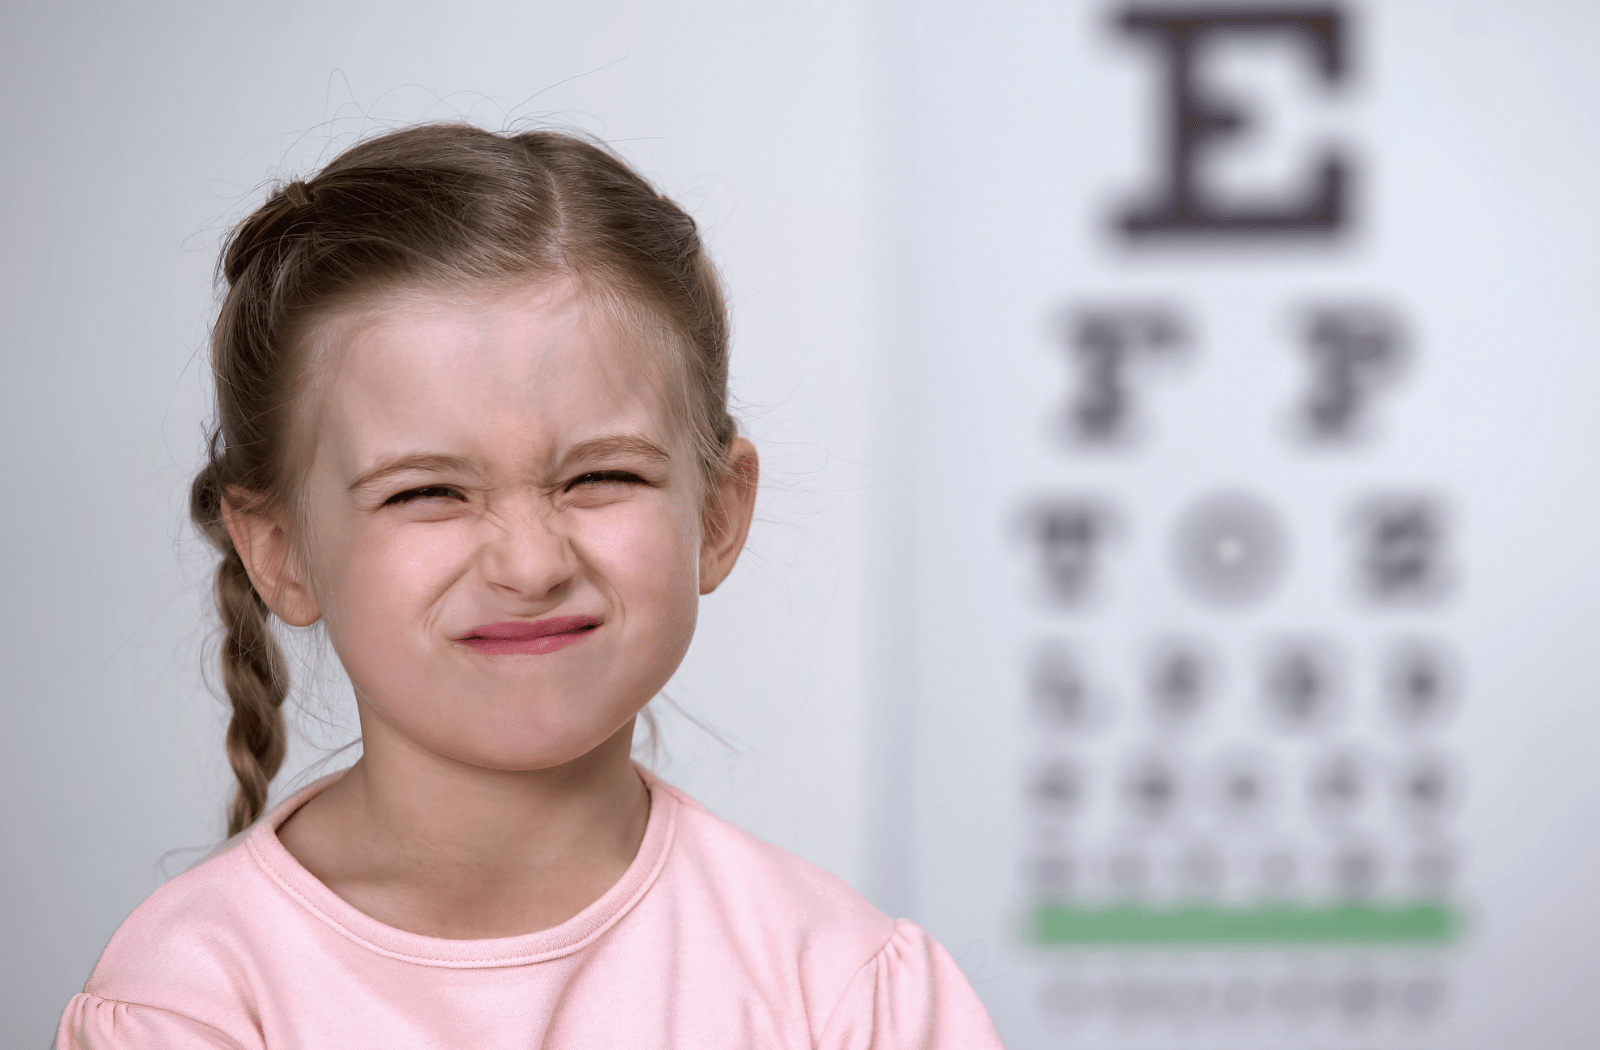 A young girl squinting due to difficulties seeing with myopia